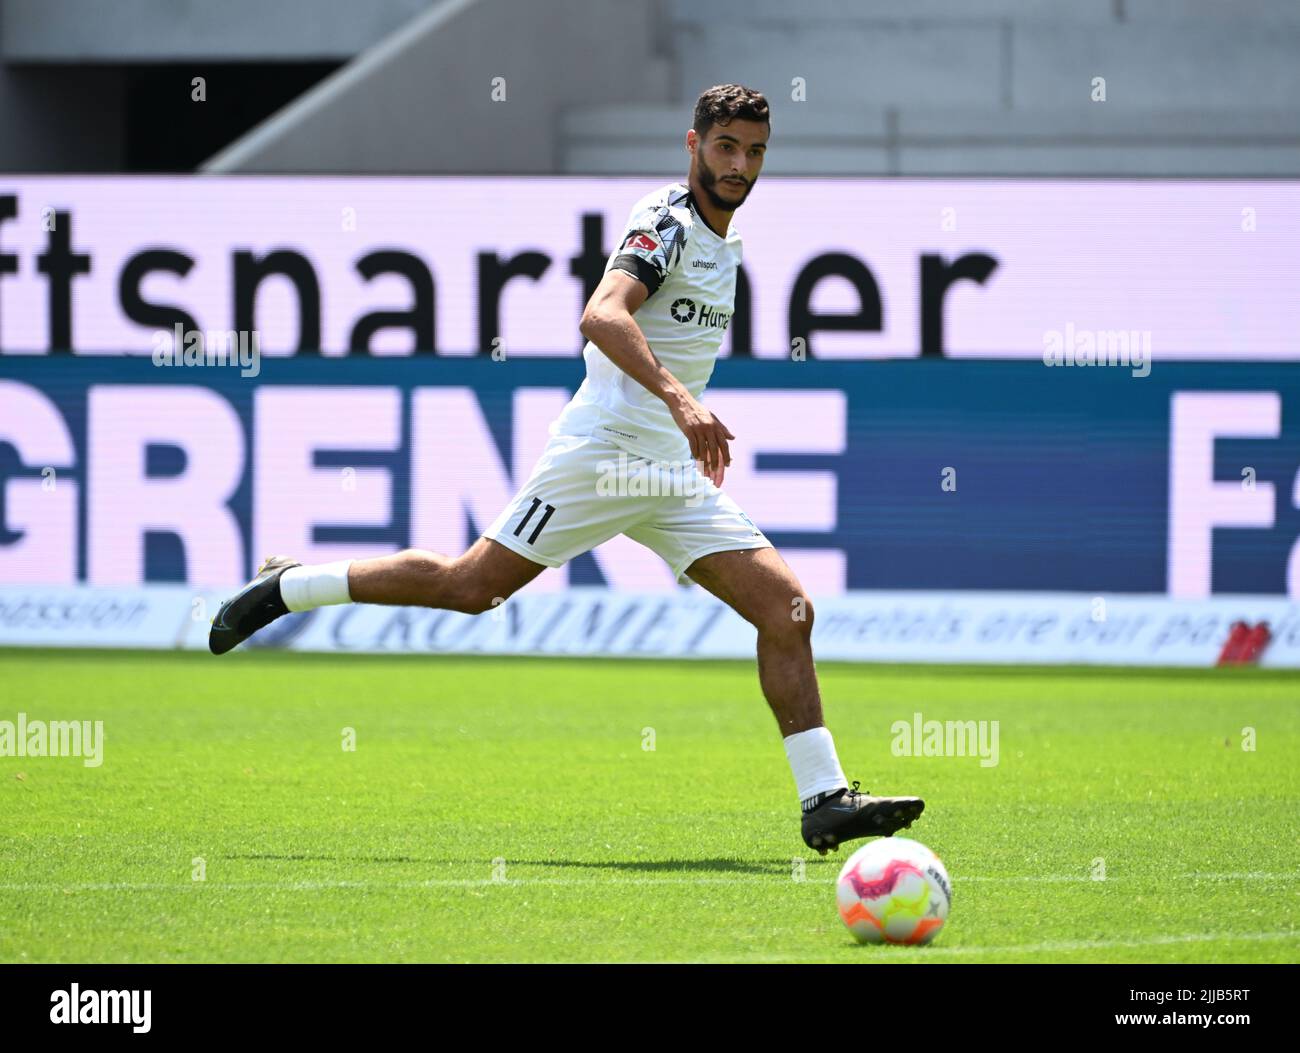 Karlsruhe, Germany. 24th July, 2022. Soccer: 2nd Bundesliga, Karlsruher SC - 1. FC Magdeburg, Matchday 2, at BBBank Wildpark. Magdeburg's Mohammed El Hankouri. Credit: Uli Deck/dpa - IMPORTANT NOTE: In accordance with the requirements of the DFL Deutsche Fußball Liga and the DFB Deutscher Fußball-Bund, it is prohibited to use or have used photographs taken in the stadium and/or of the match in the form of sequence pictures and/or video-like photo series./dpa/Alamy Live News Stock Photo